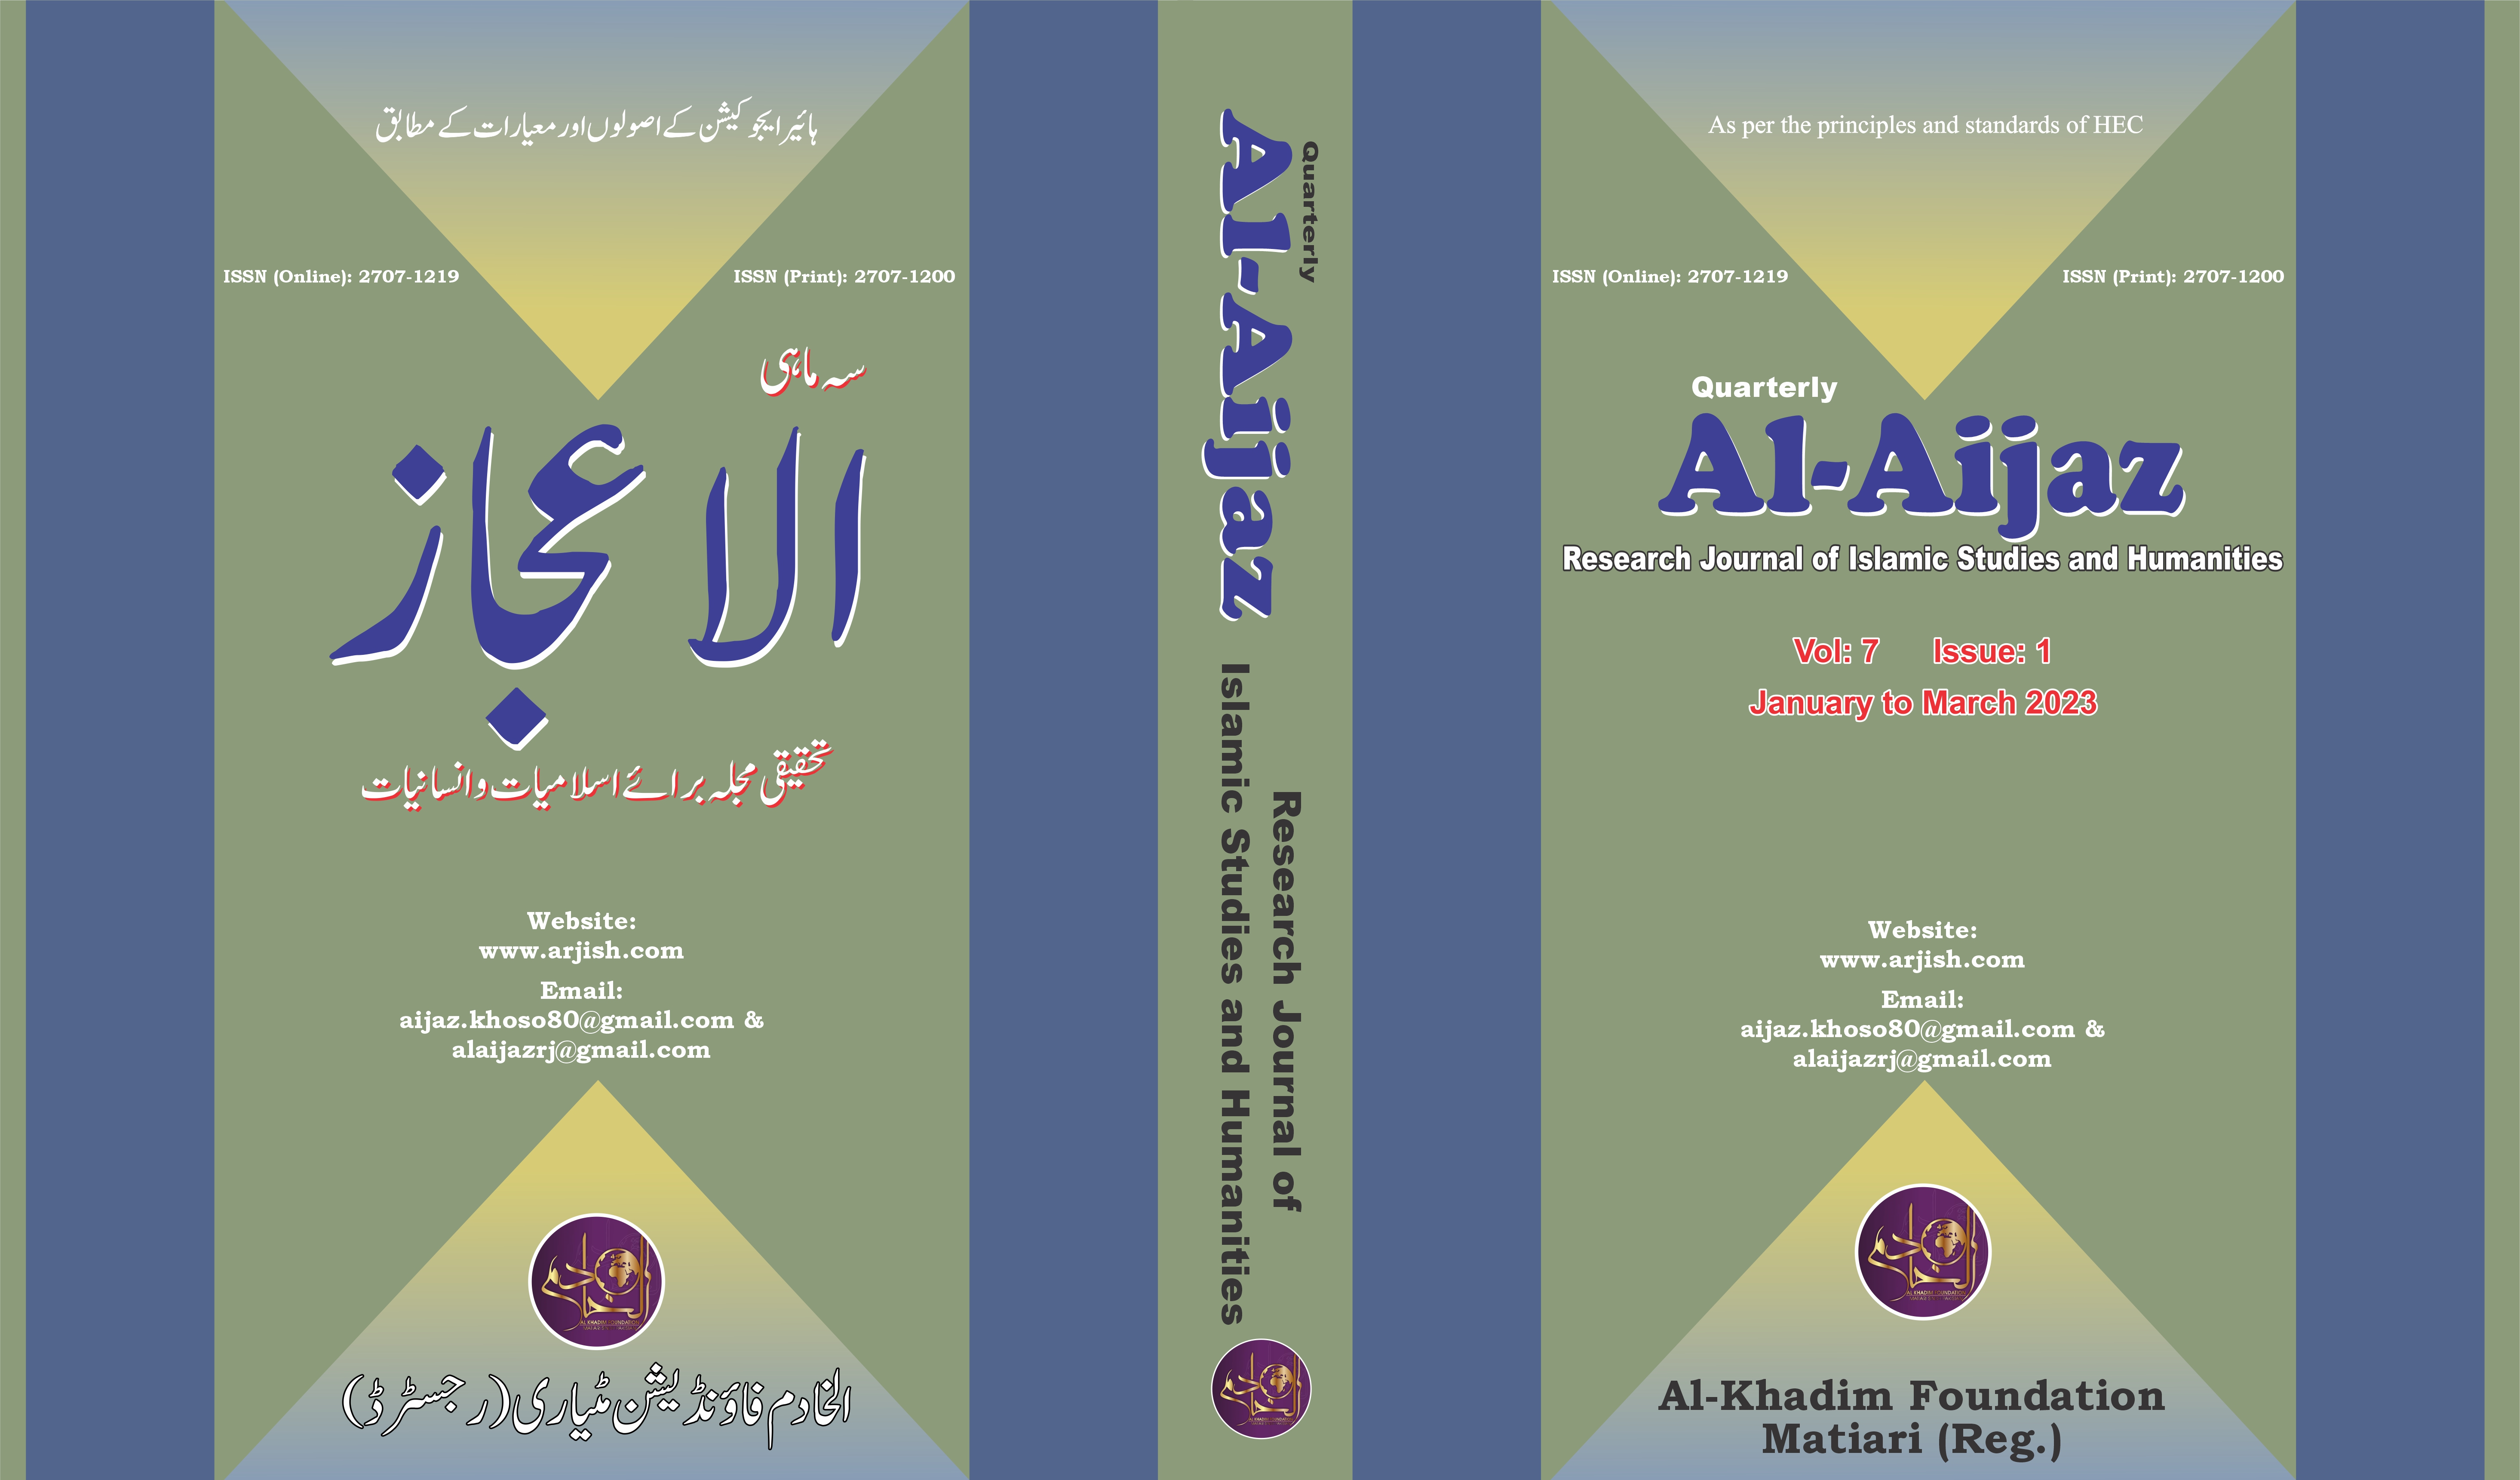 					View Vol. 7 No. 1 (2023): Al-Aijaz Research Journal of Islamic Studies & Humanities (January to March 2023)
				